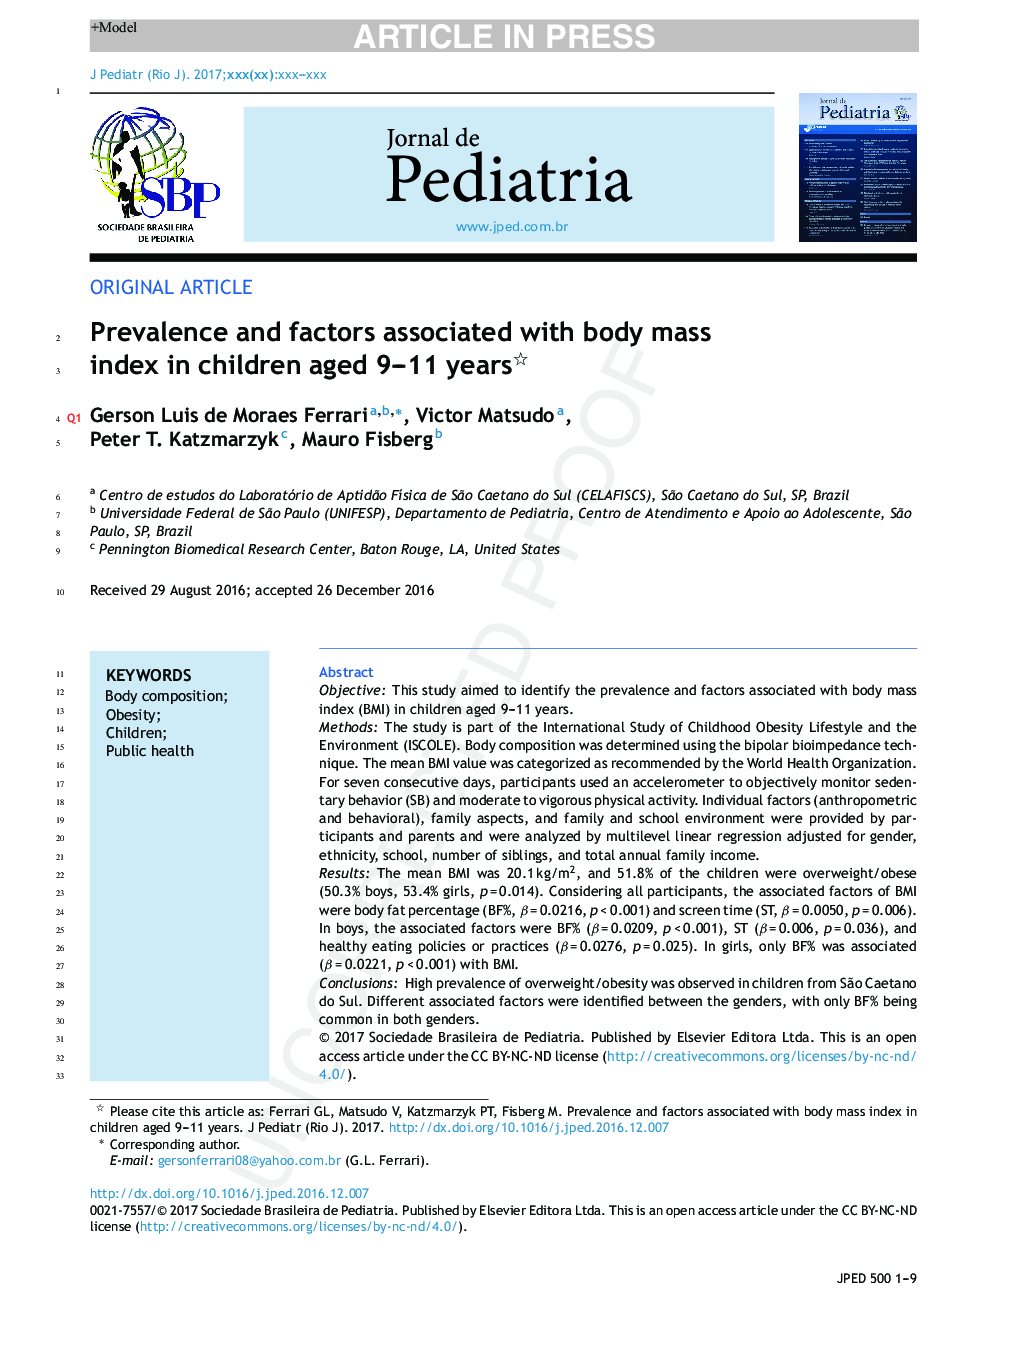 Prevalence and factors associated with body mass index in children aged 9-11 years